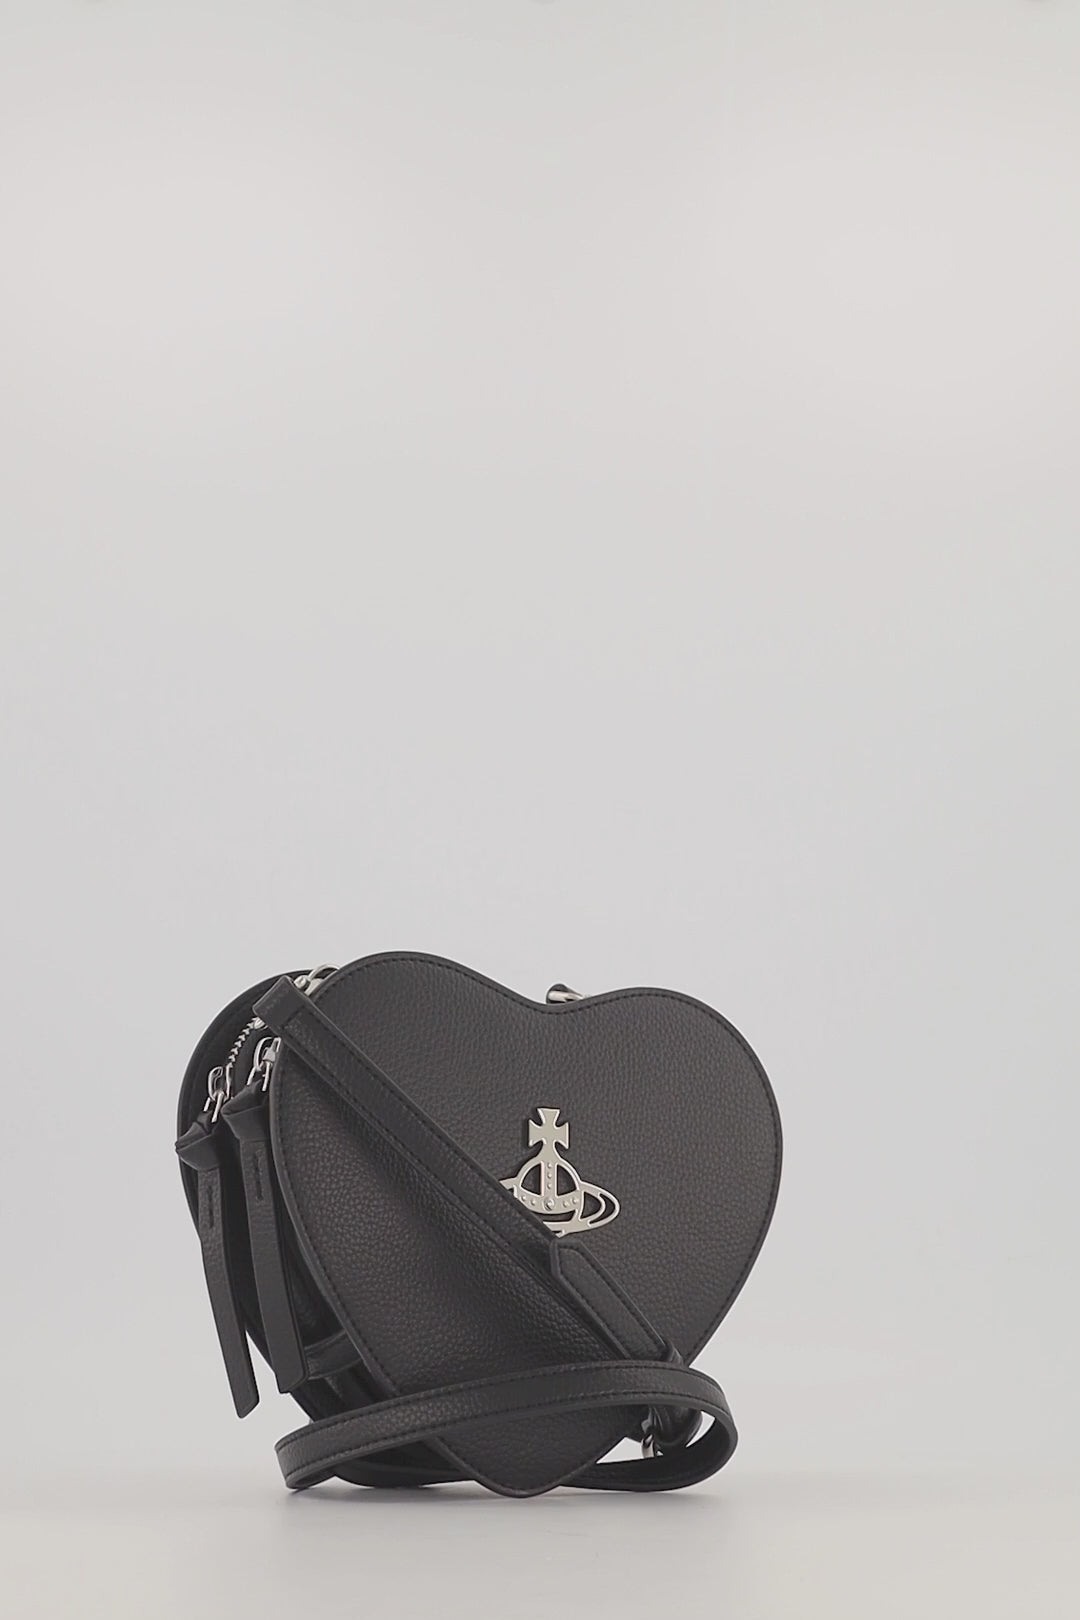 Vivienne Westwood Louise Heart Patent Leather Crossbody Bag in